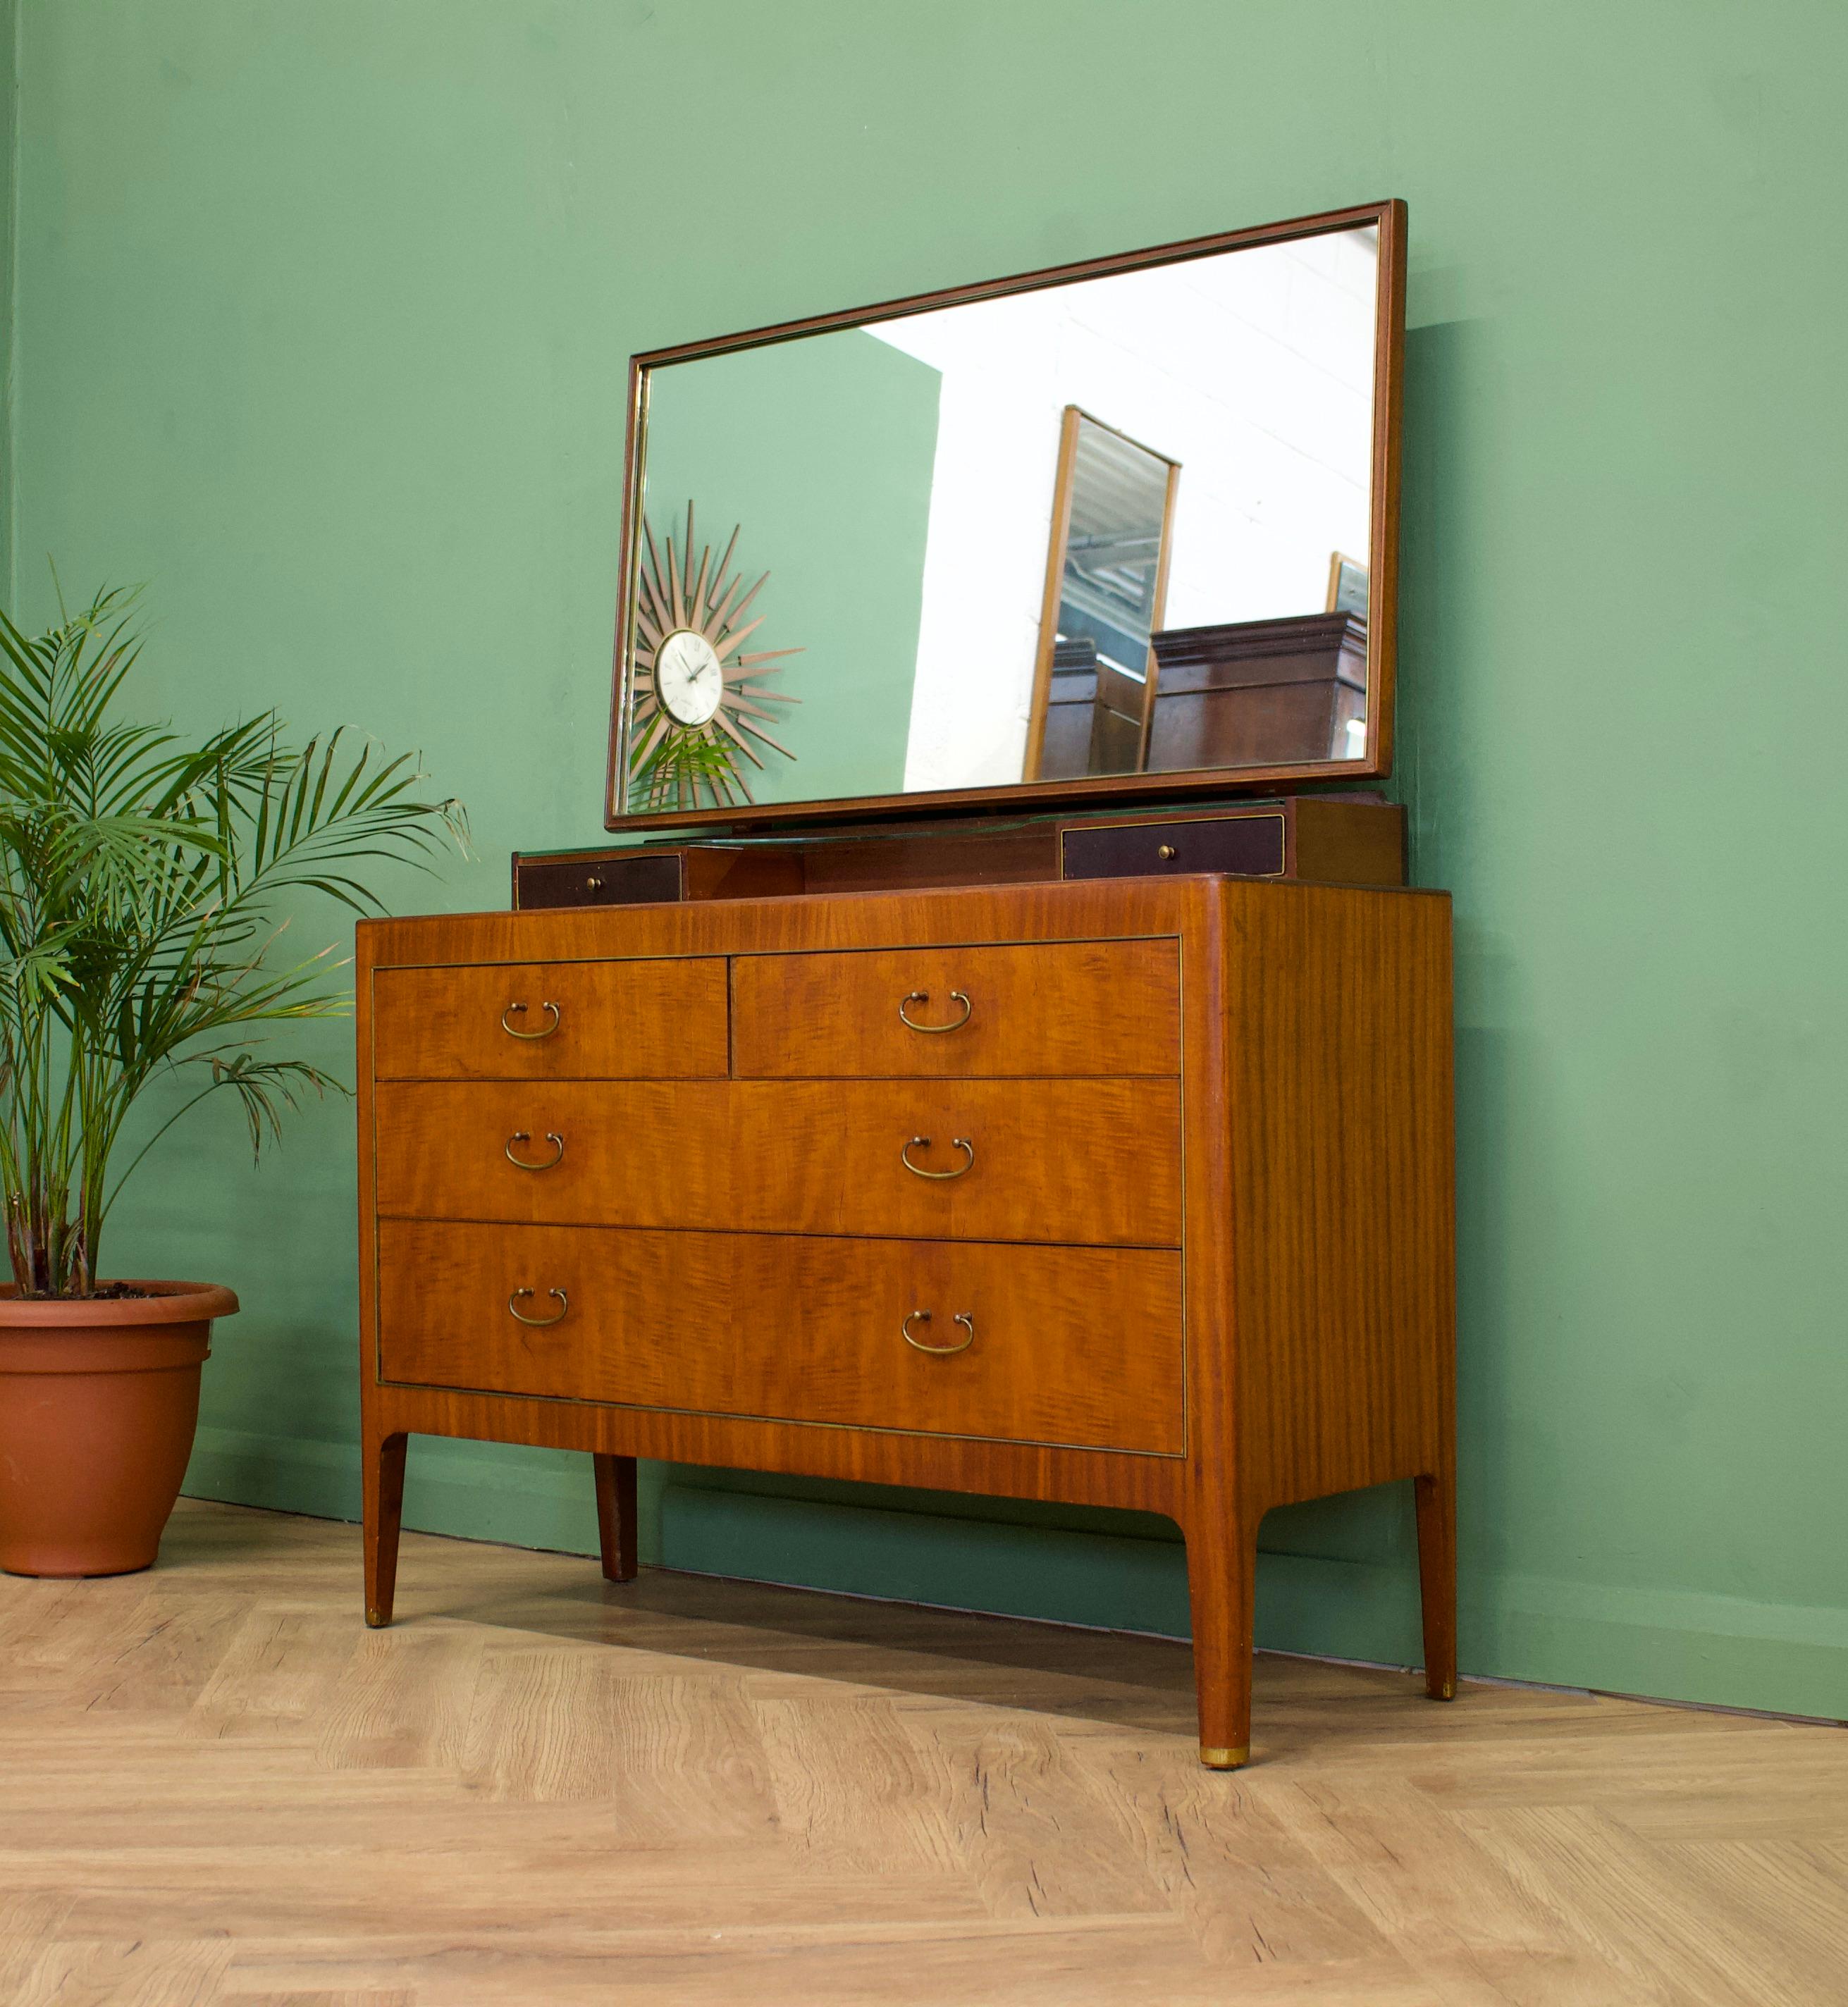 British Midcentury Mahogany Dressing Chest by Greaves and Thomas, 1950s For Sale